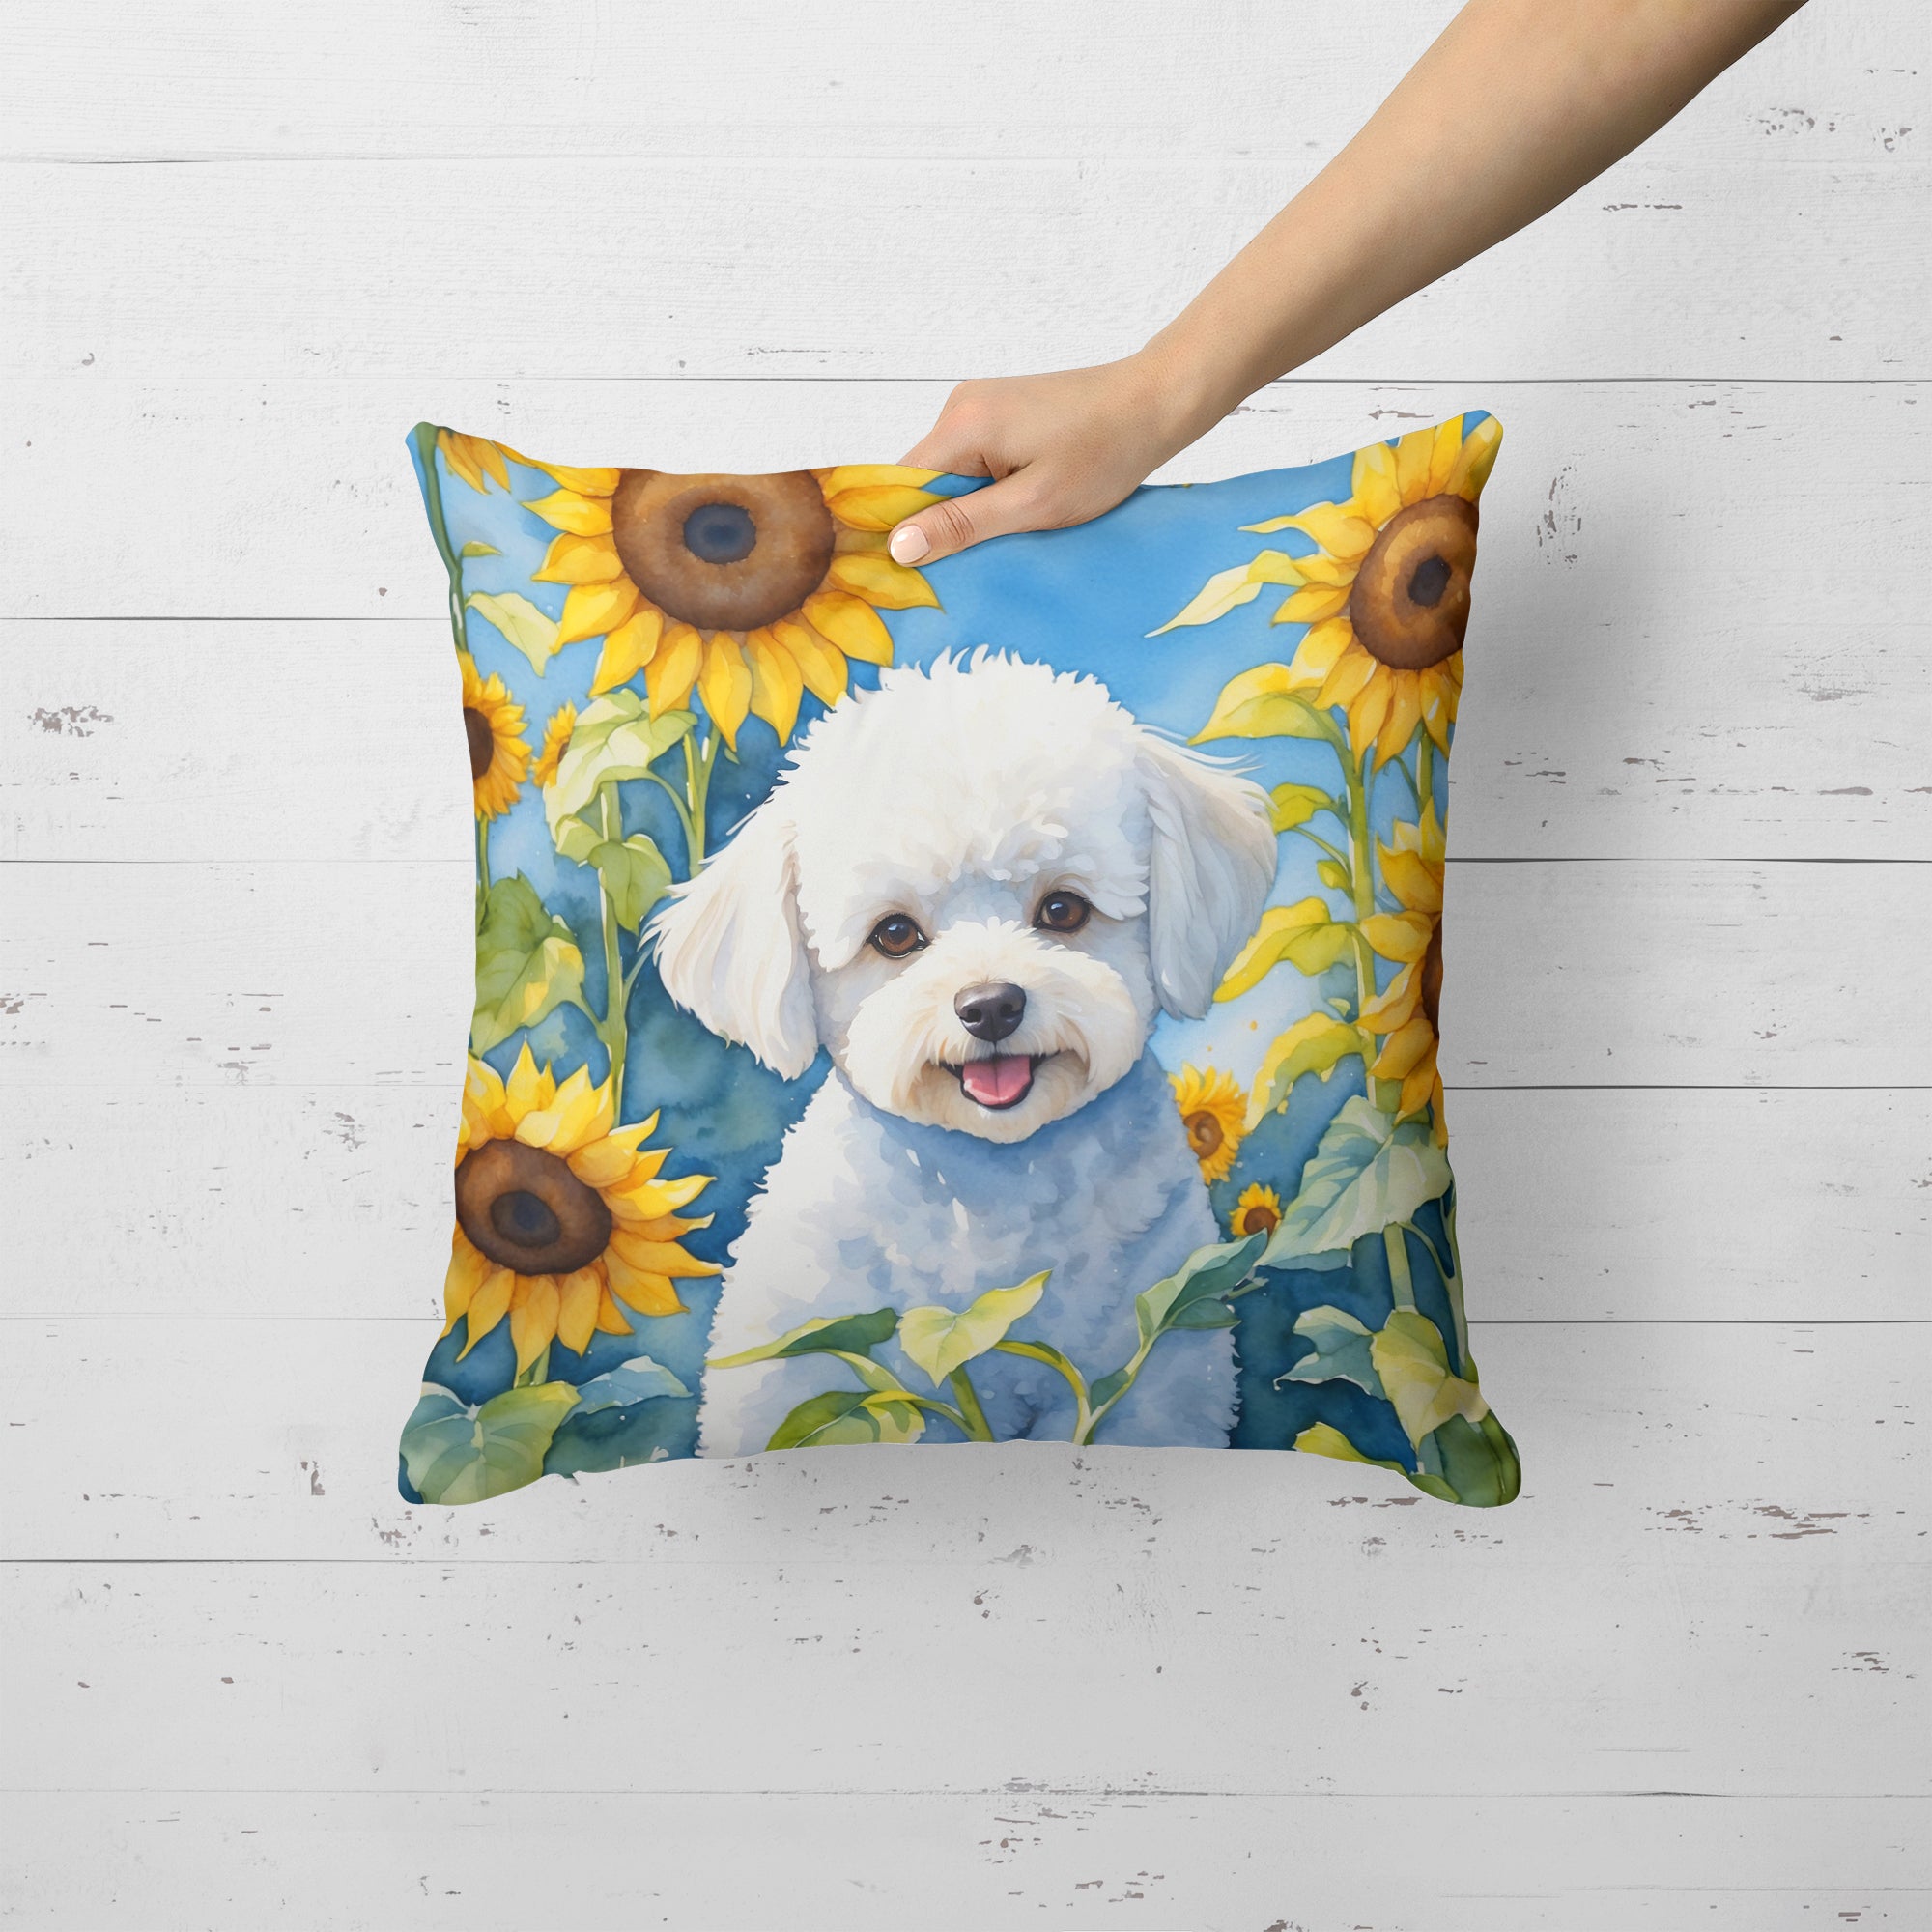 Buy this Bichon Frise in Sunflowers Throw Pillow